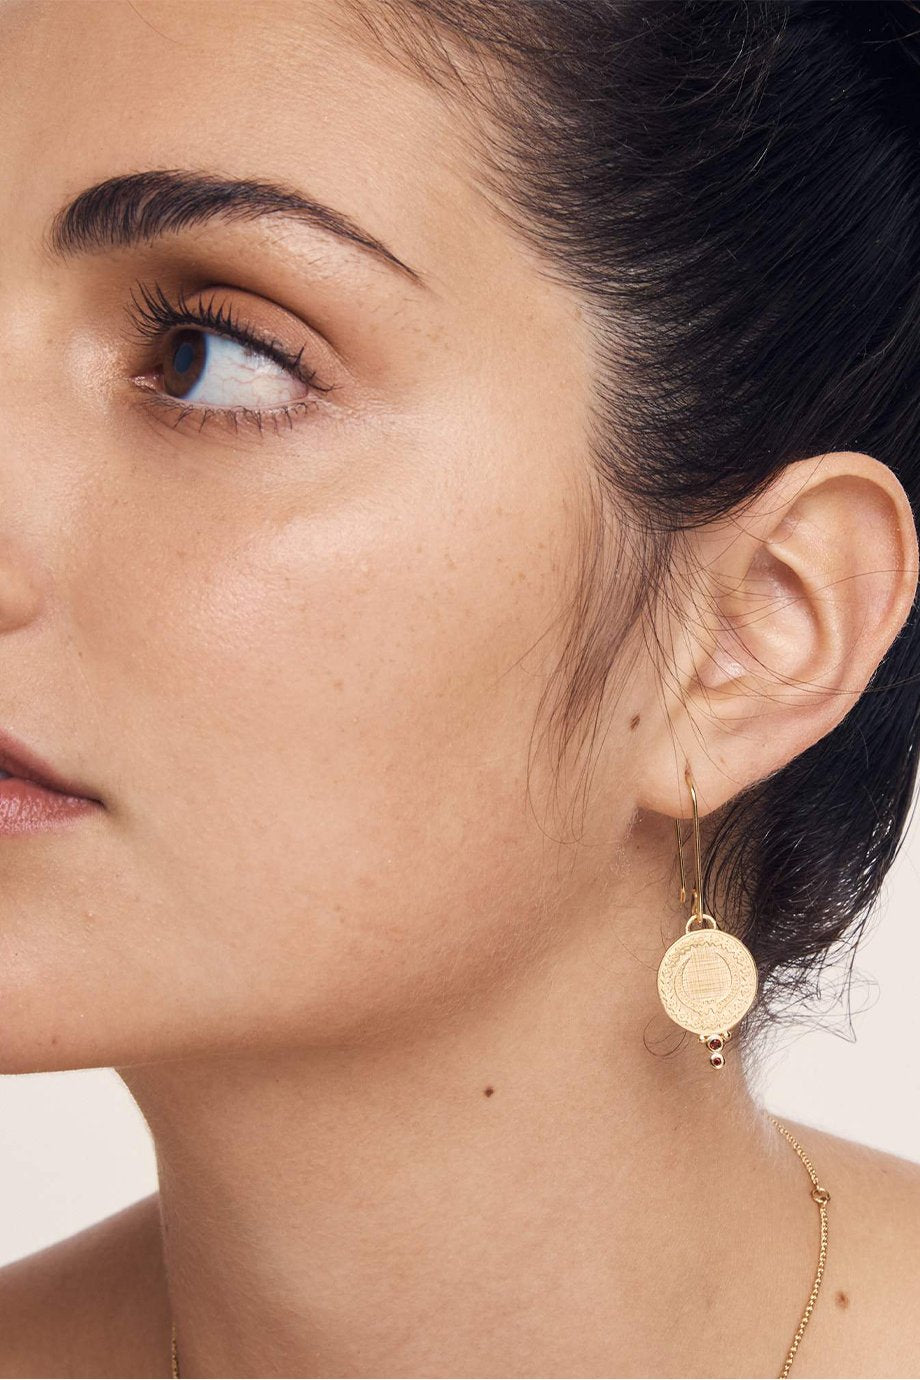 Temple Of The Sun Ariana Earrings - Gold